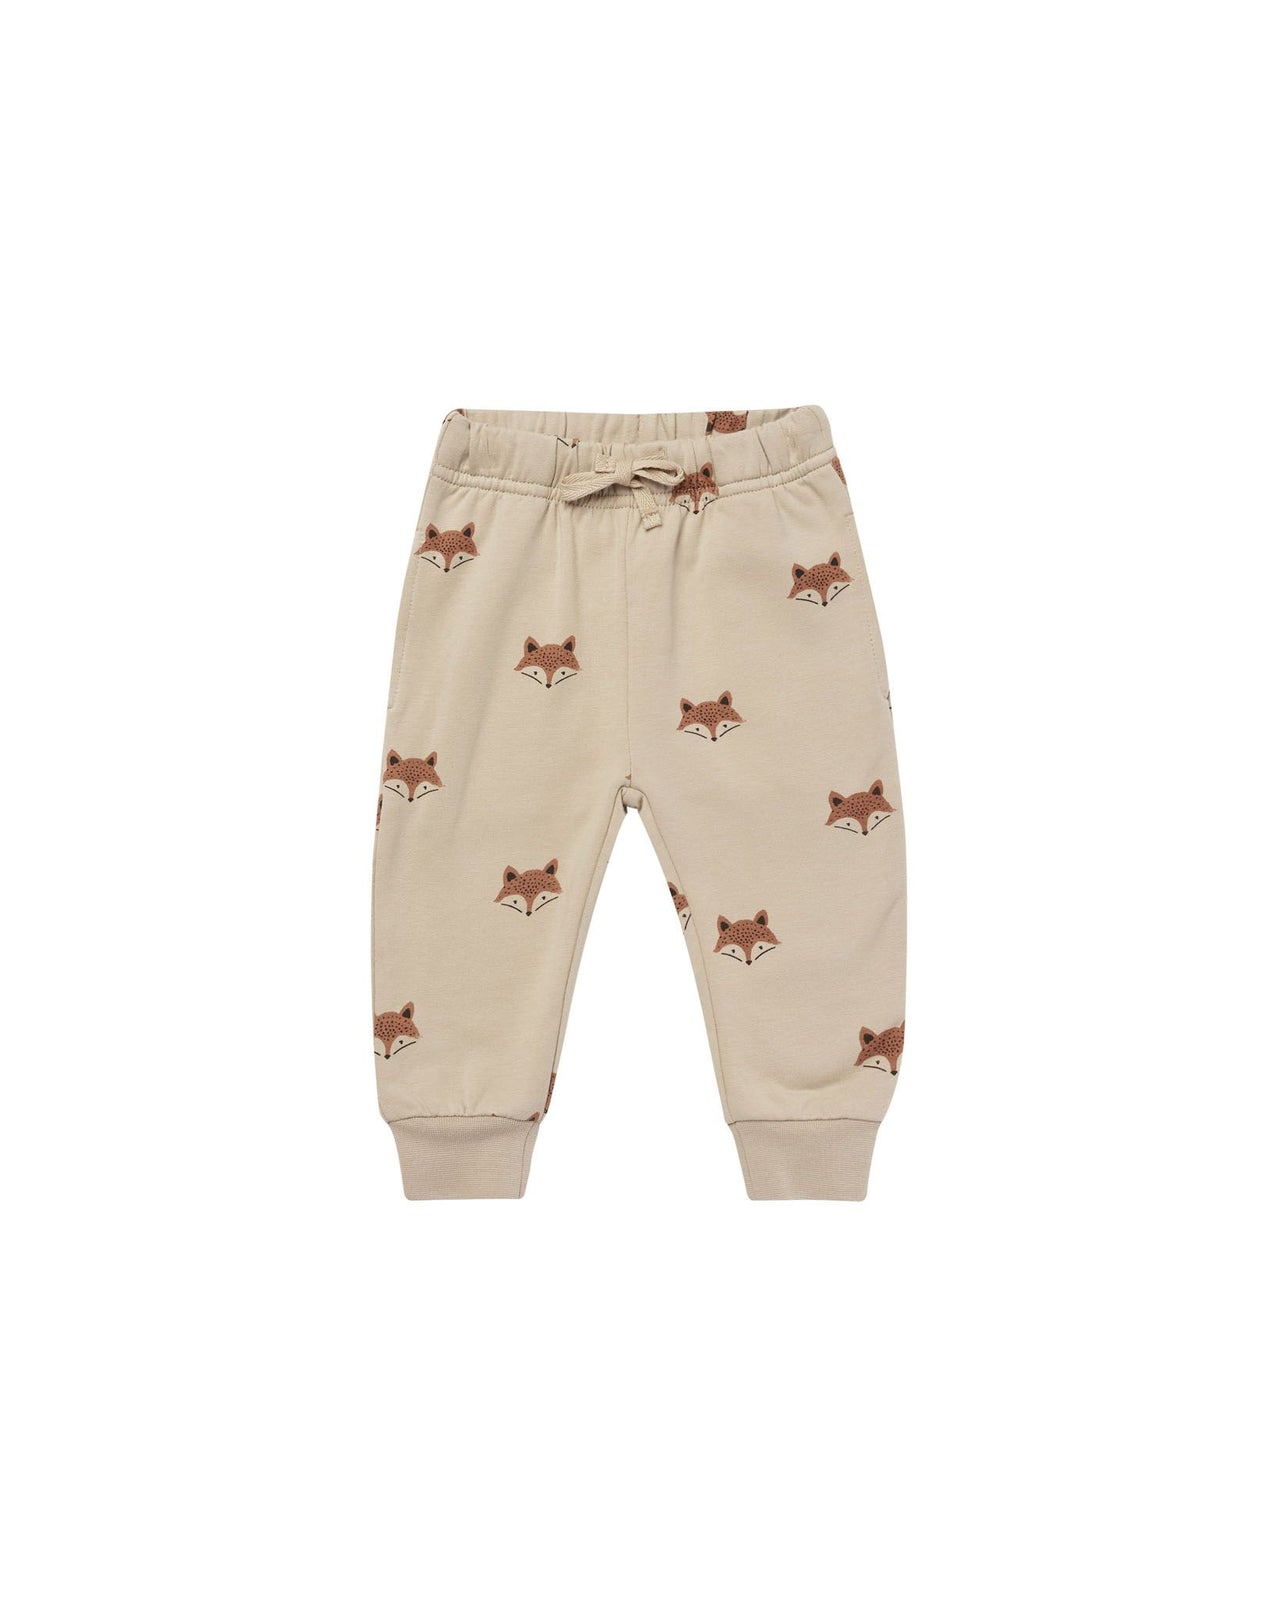 Quincy Mae Relaxed Fleece Sweatpant, Foxes